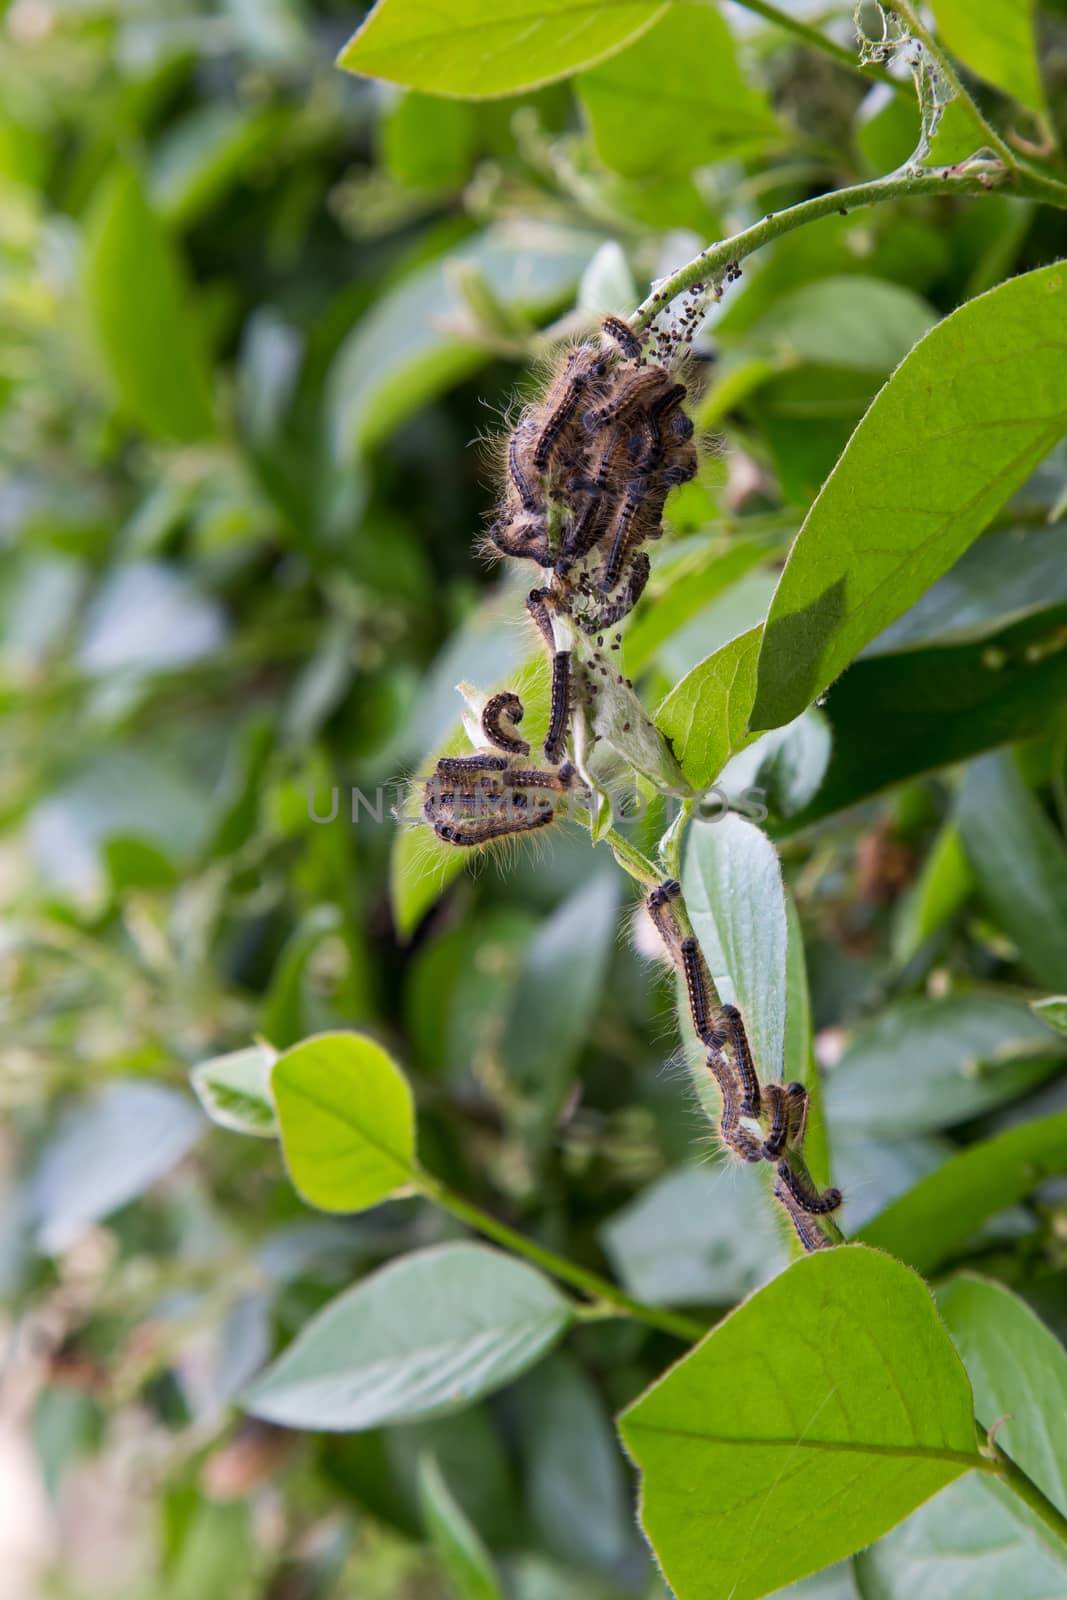 Multiple Tent Caterpillars on a Bush by rjamphoto